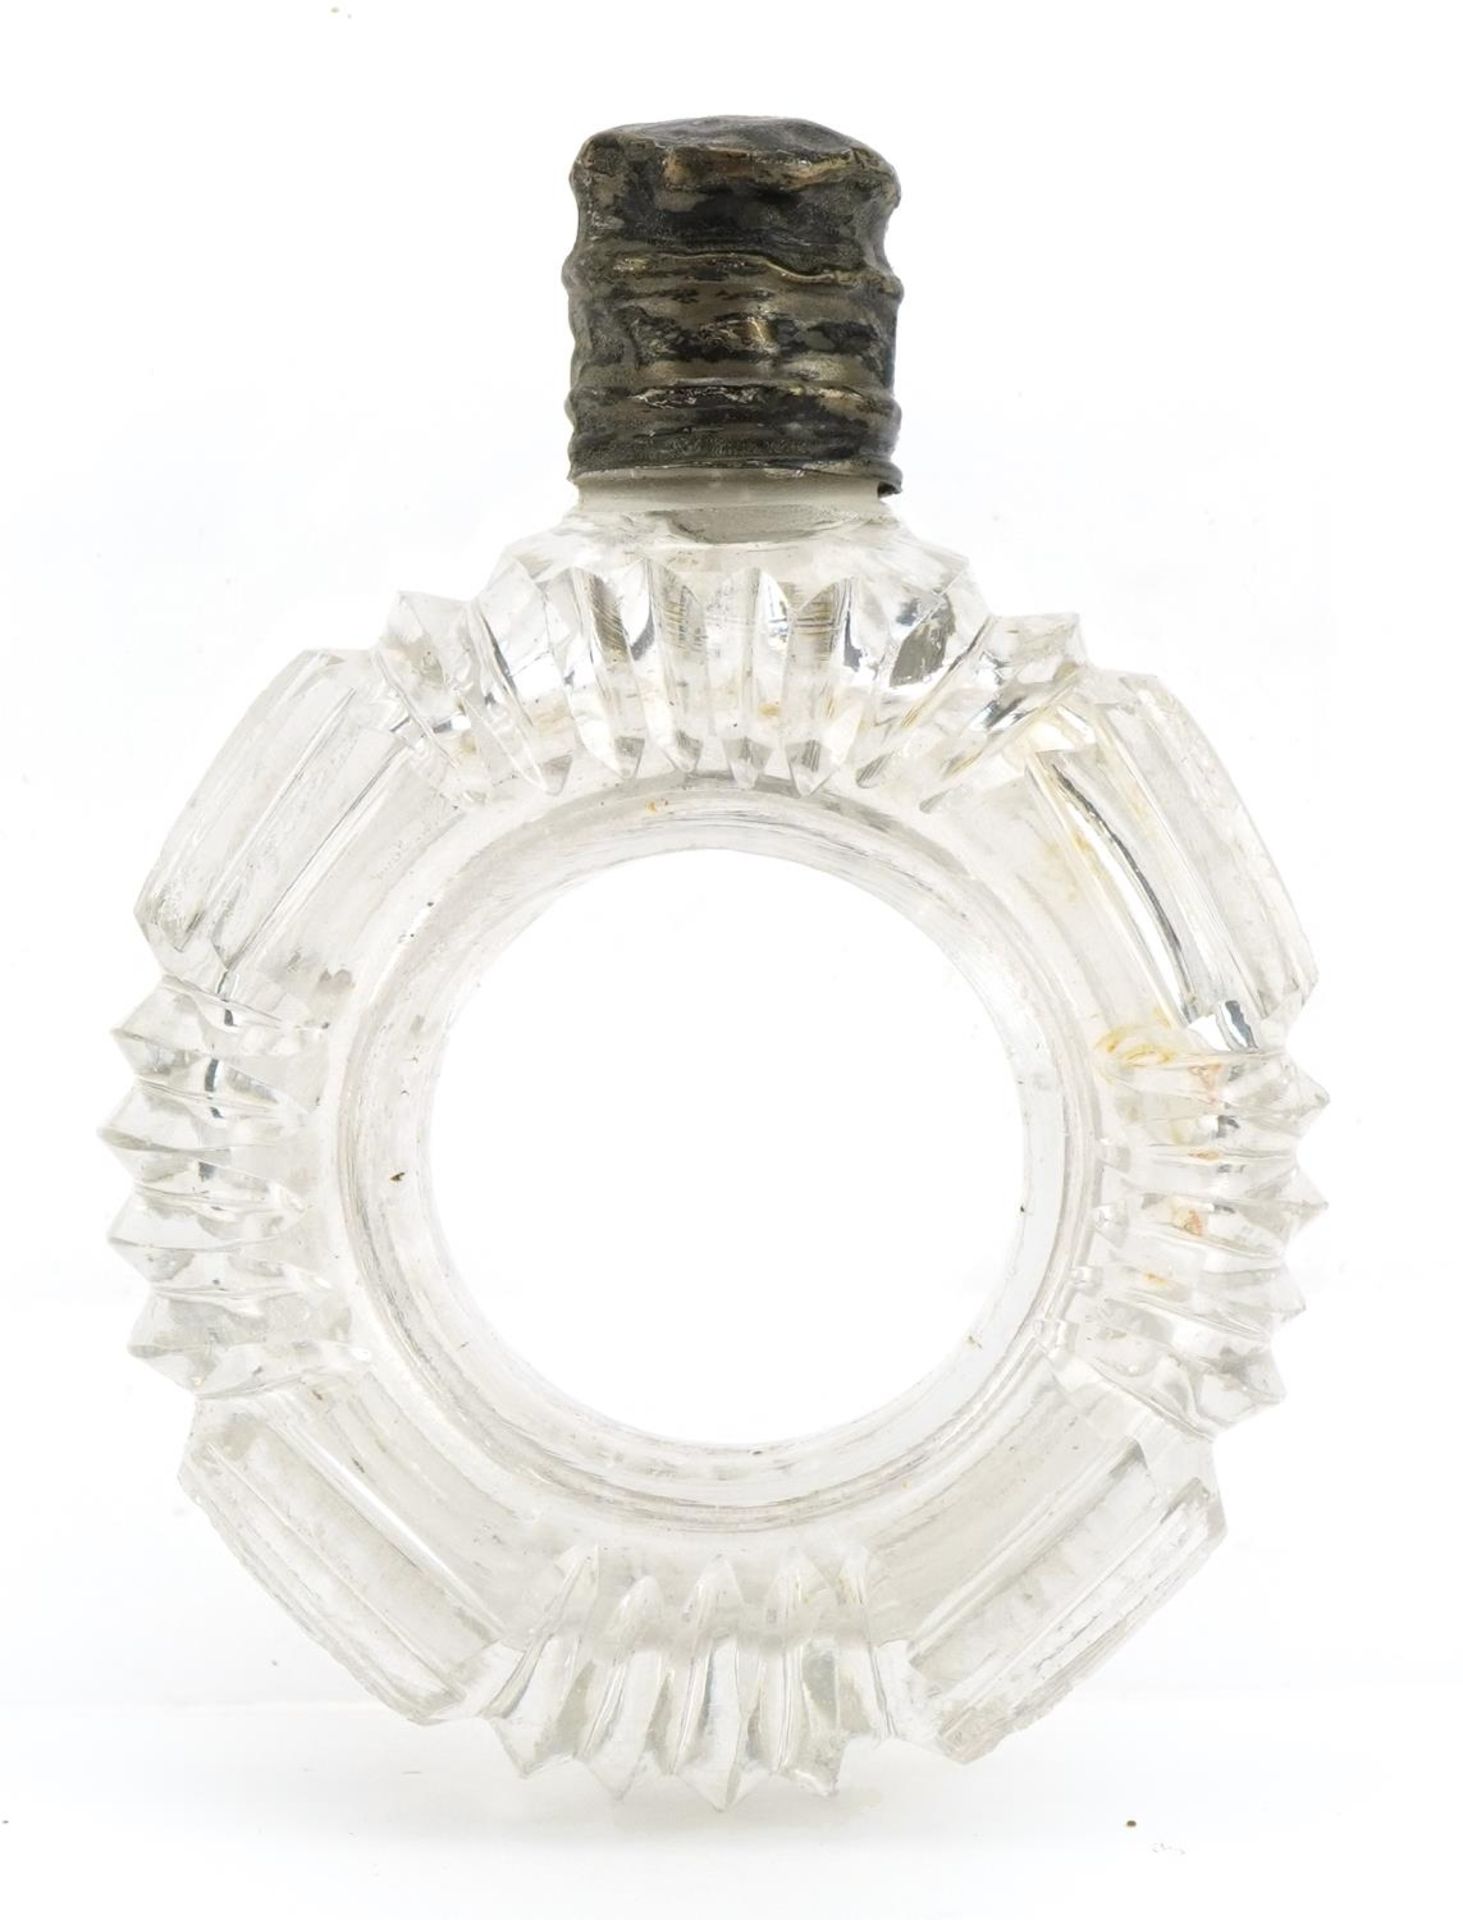 Circular cut glass scent bottle with unmarked silver lid and stopper, 6.5cm high - Image 2 of 4